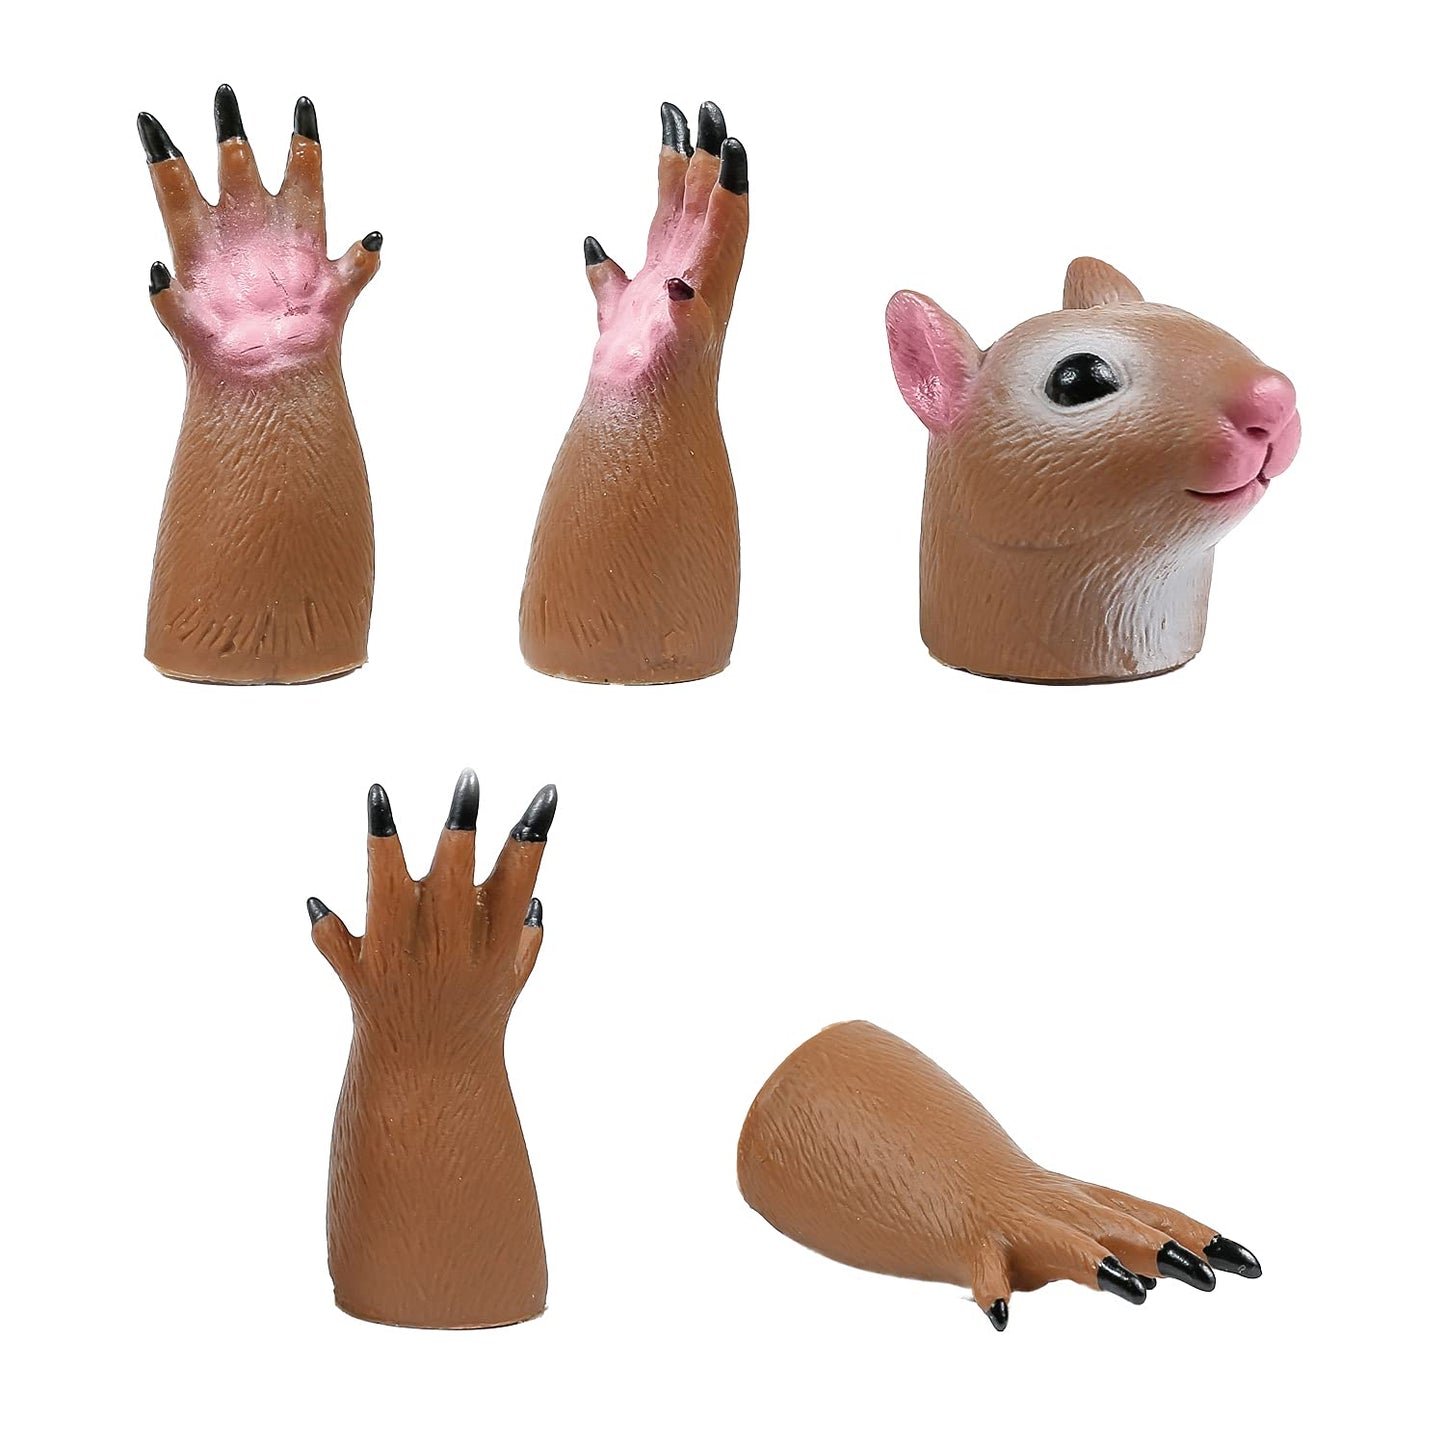 AQKILO® Squirrel Finger Puppet Set, Animals Puppet Show Theater Props, Novelty Toys Weird Stuff Gifts